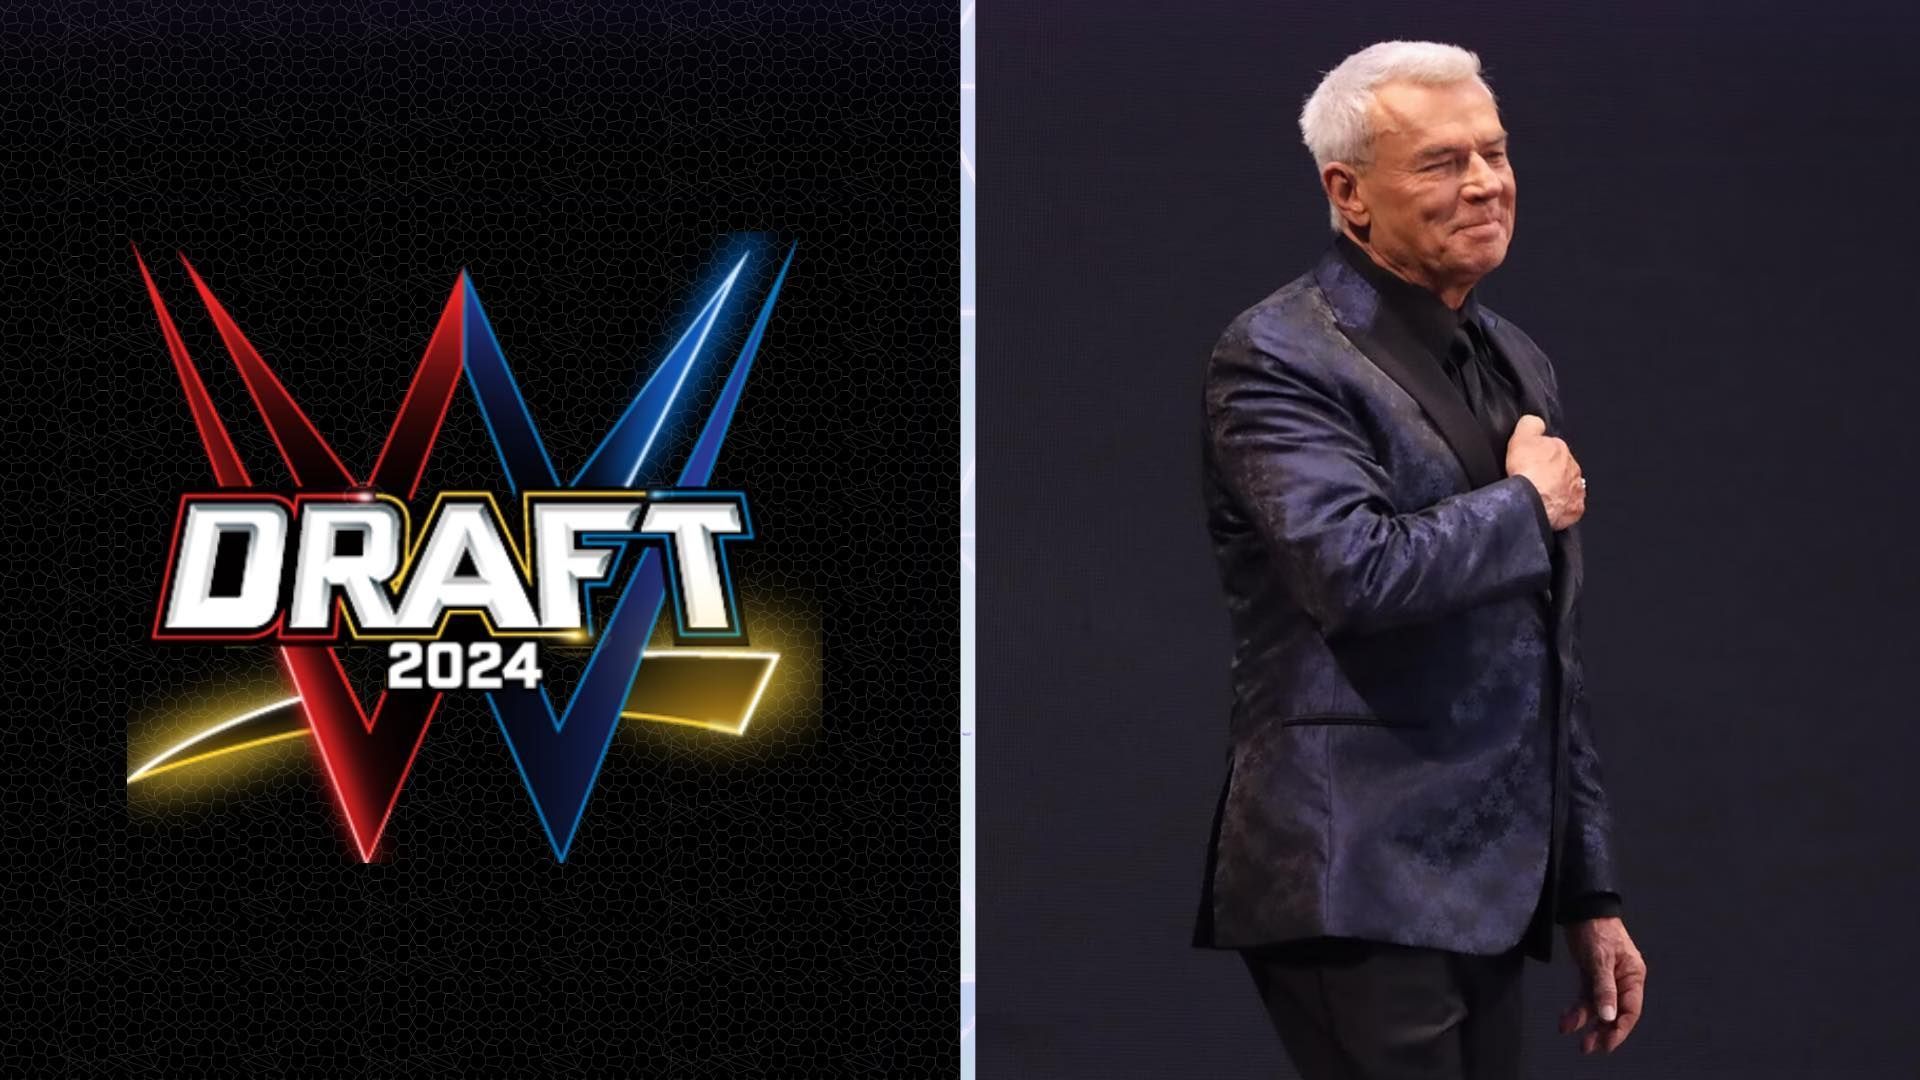 Some WWE legends could present at the 2024 Draft including on SmackDown